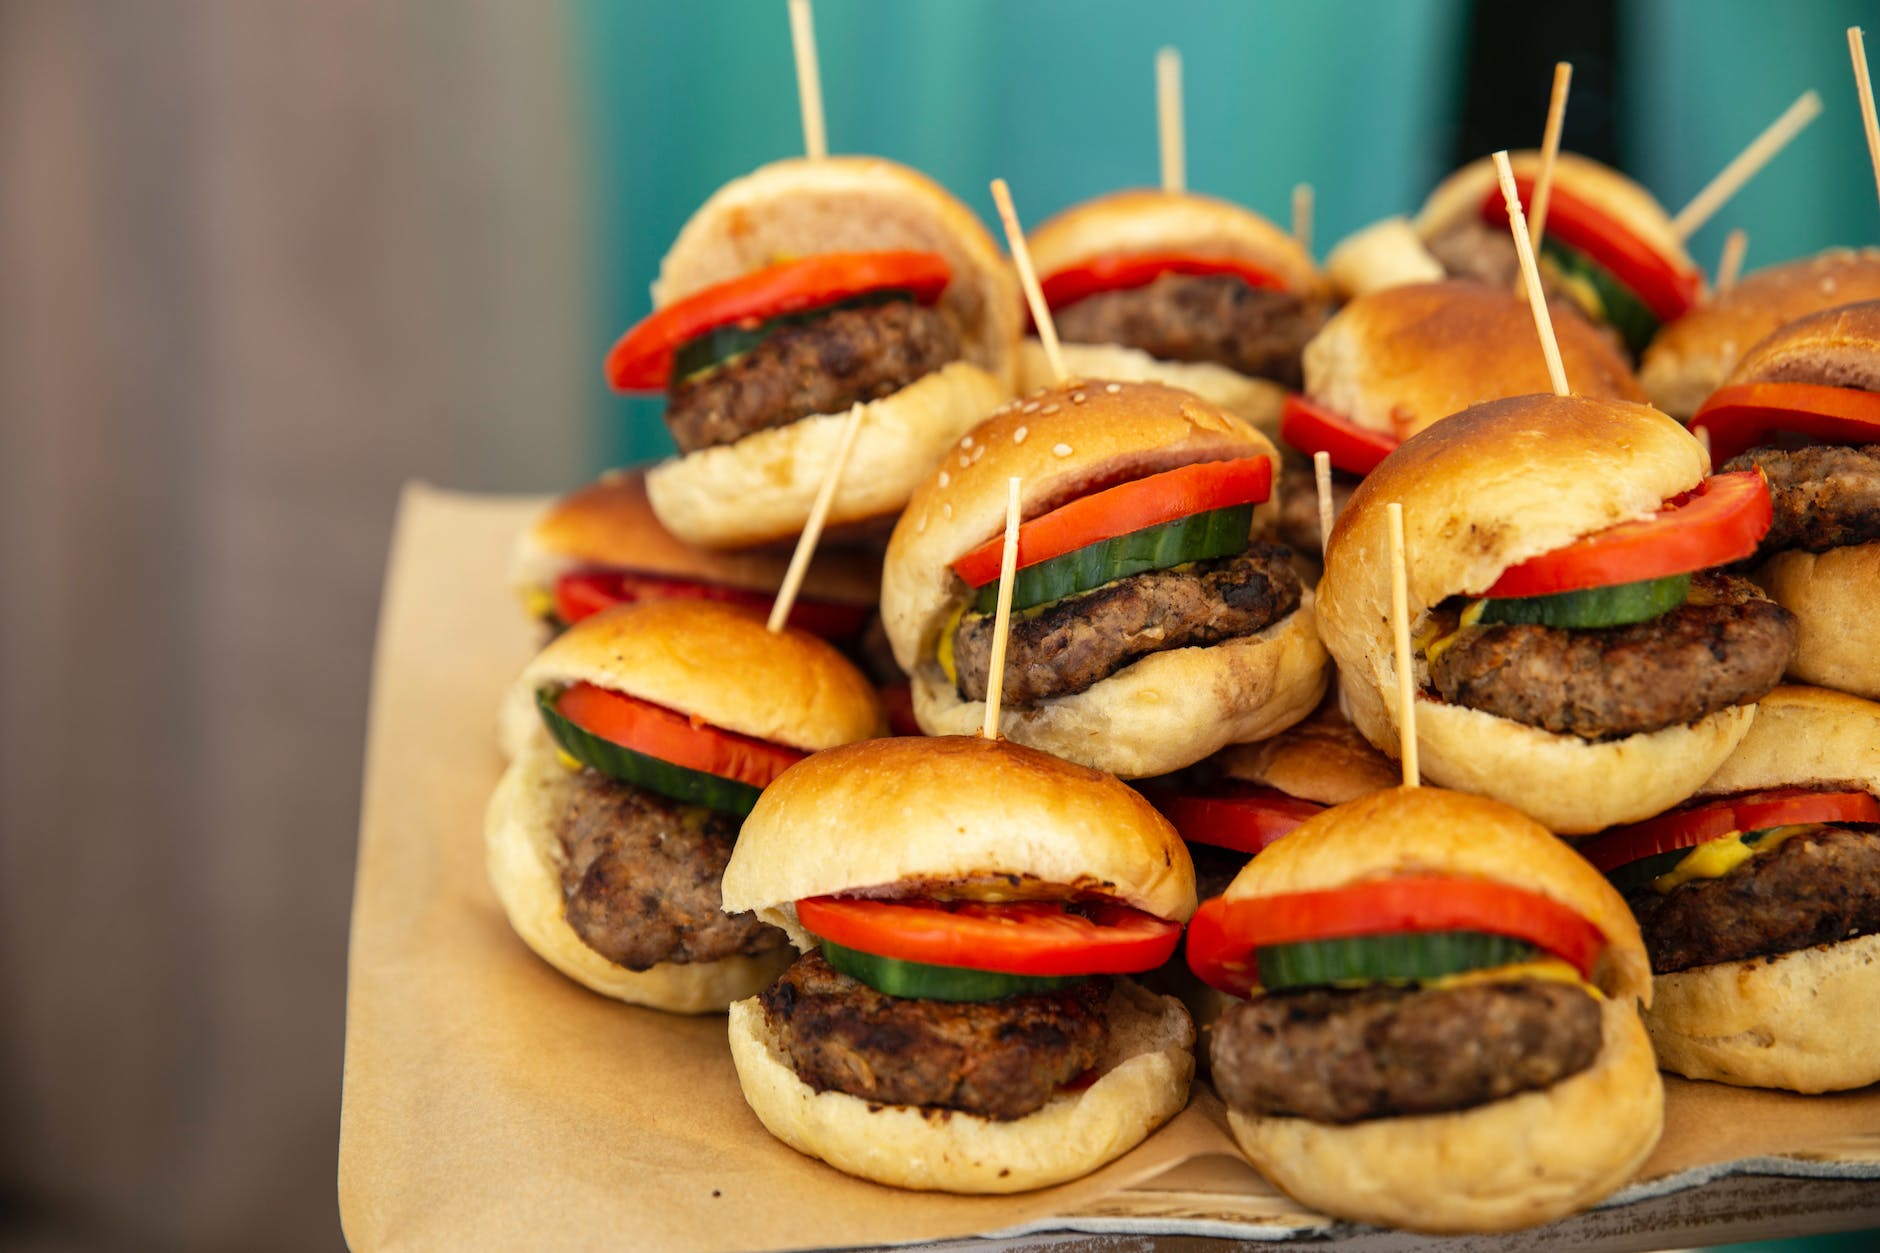 selective focus photography of pile of burgers